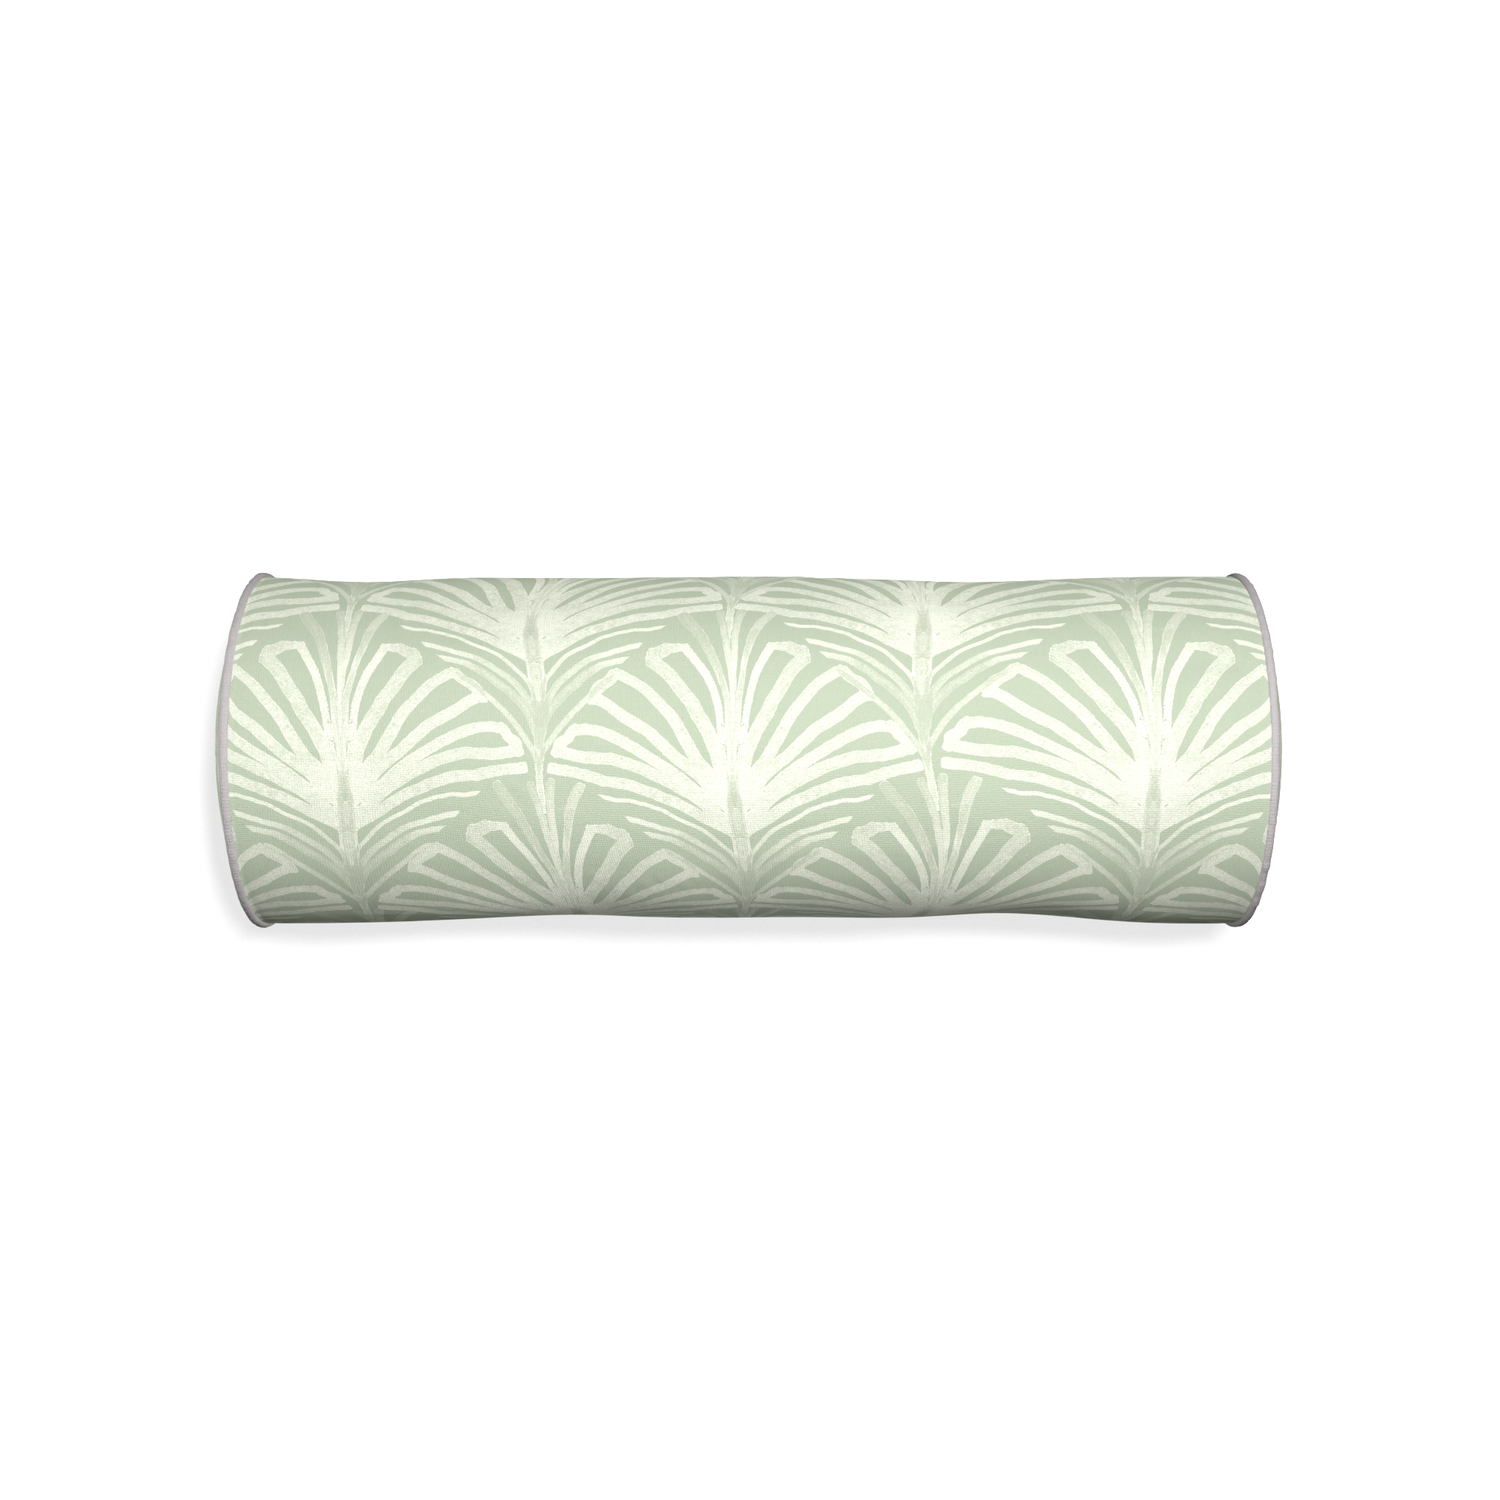 Bolster suzy sage custom sage green palmpillow with pebble piping on white background